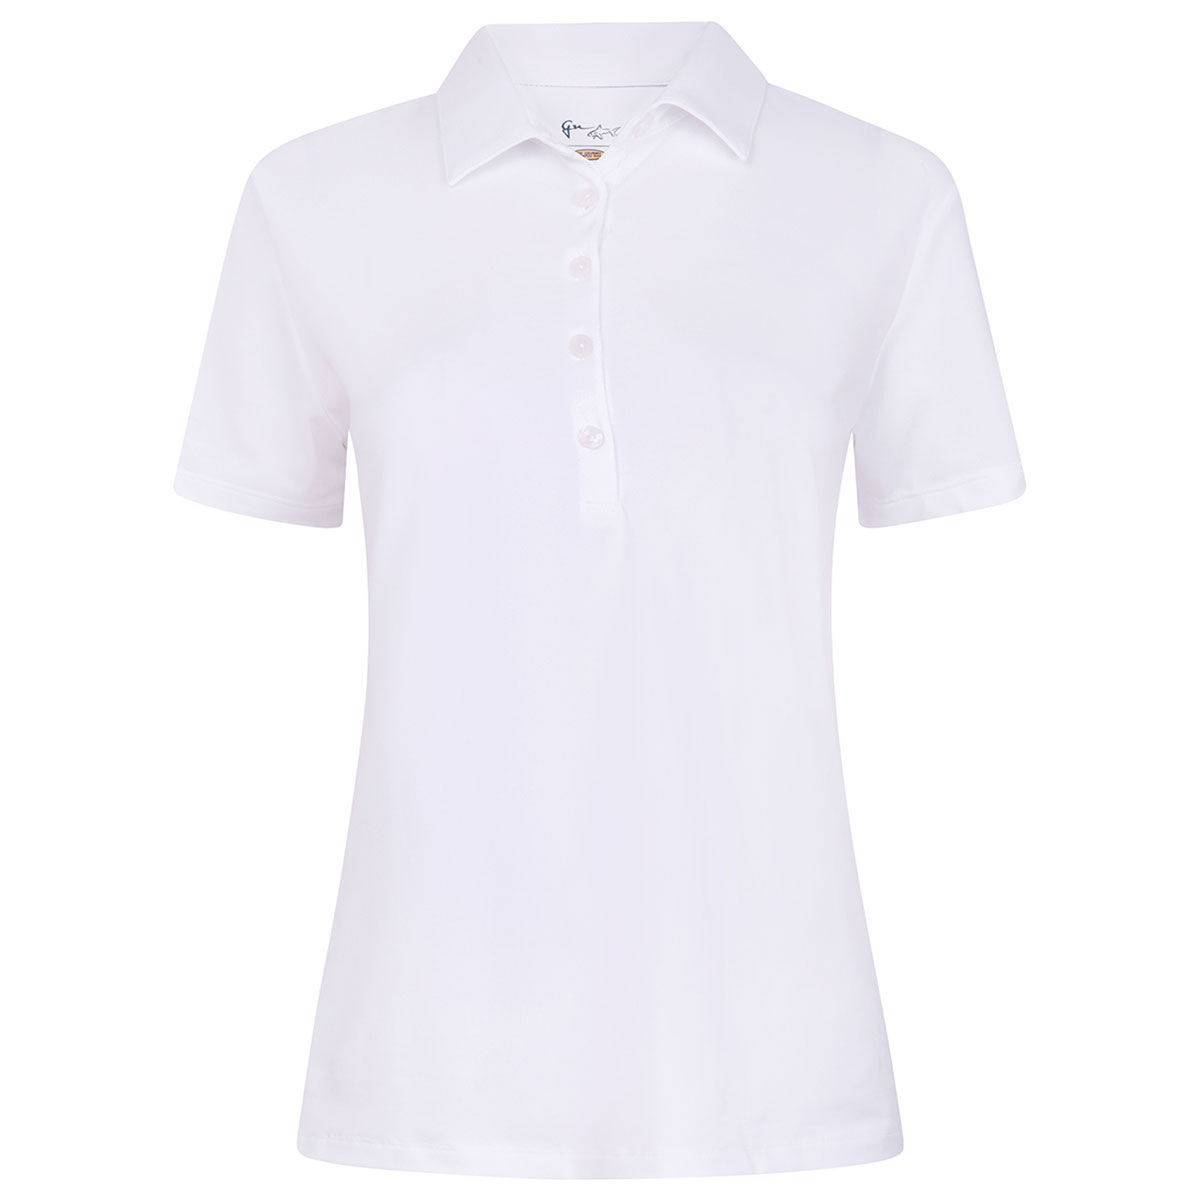 Greg Norman White Embroidered Freedom Pique Golf Polo Shirt, Womens | American Golf, Size: Small - Father's Day Gift von Greg Norman